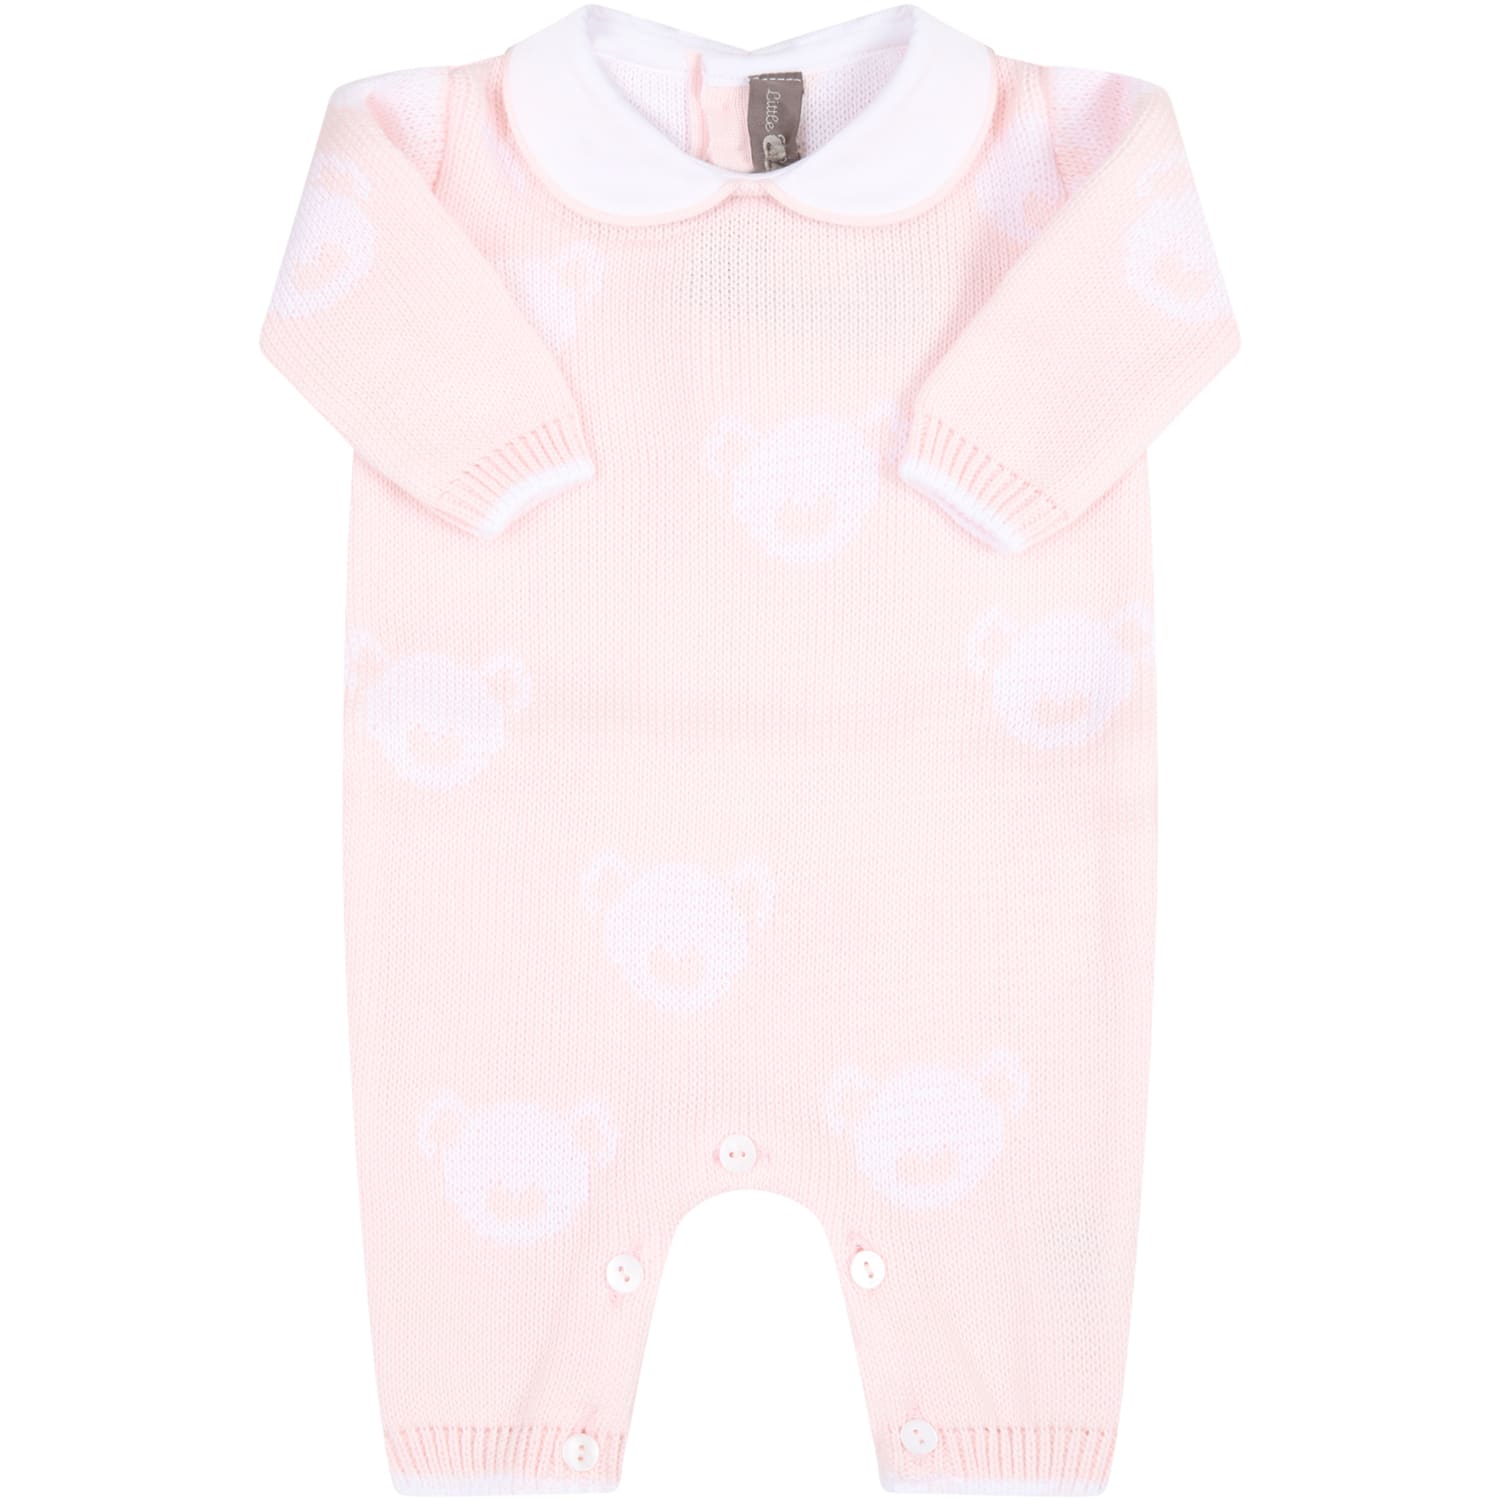 Little Bear Pink Babygrow For Babygirl With Bears